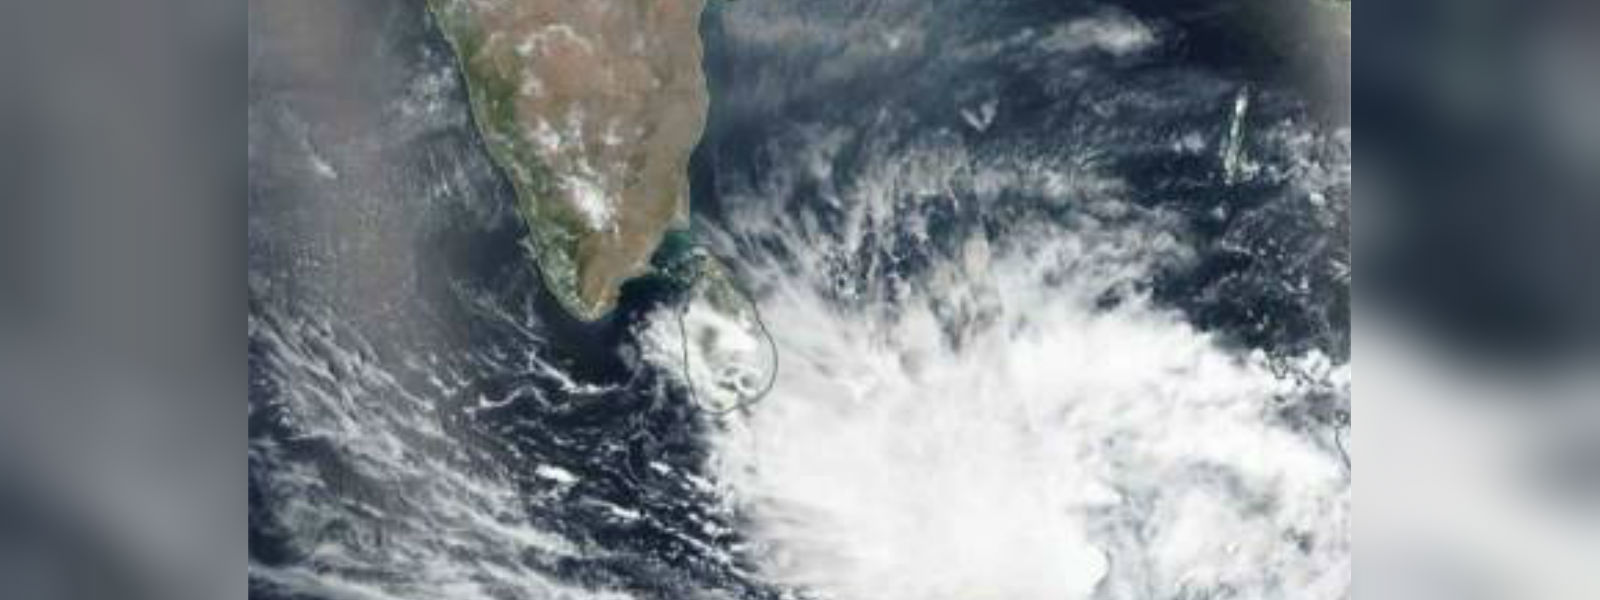 SL confirms two deaths due to Cyclone Burevi